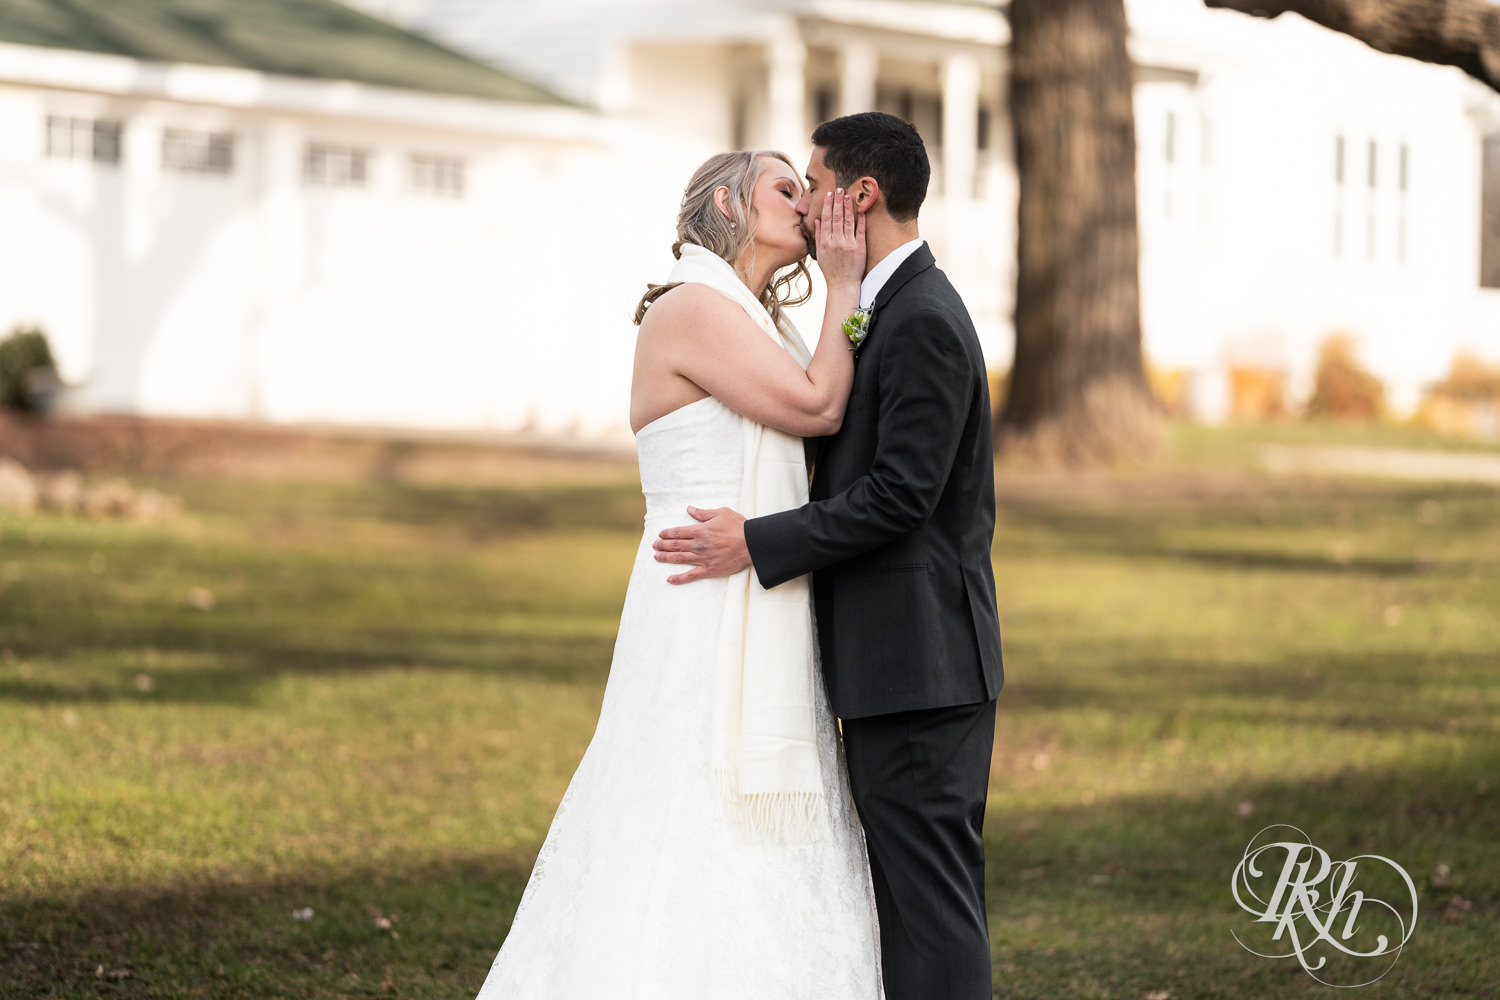 Bride and groom dance and kiss in front of a white farmhouse at Almquist Farm in Hastings, Minnesota.